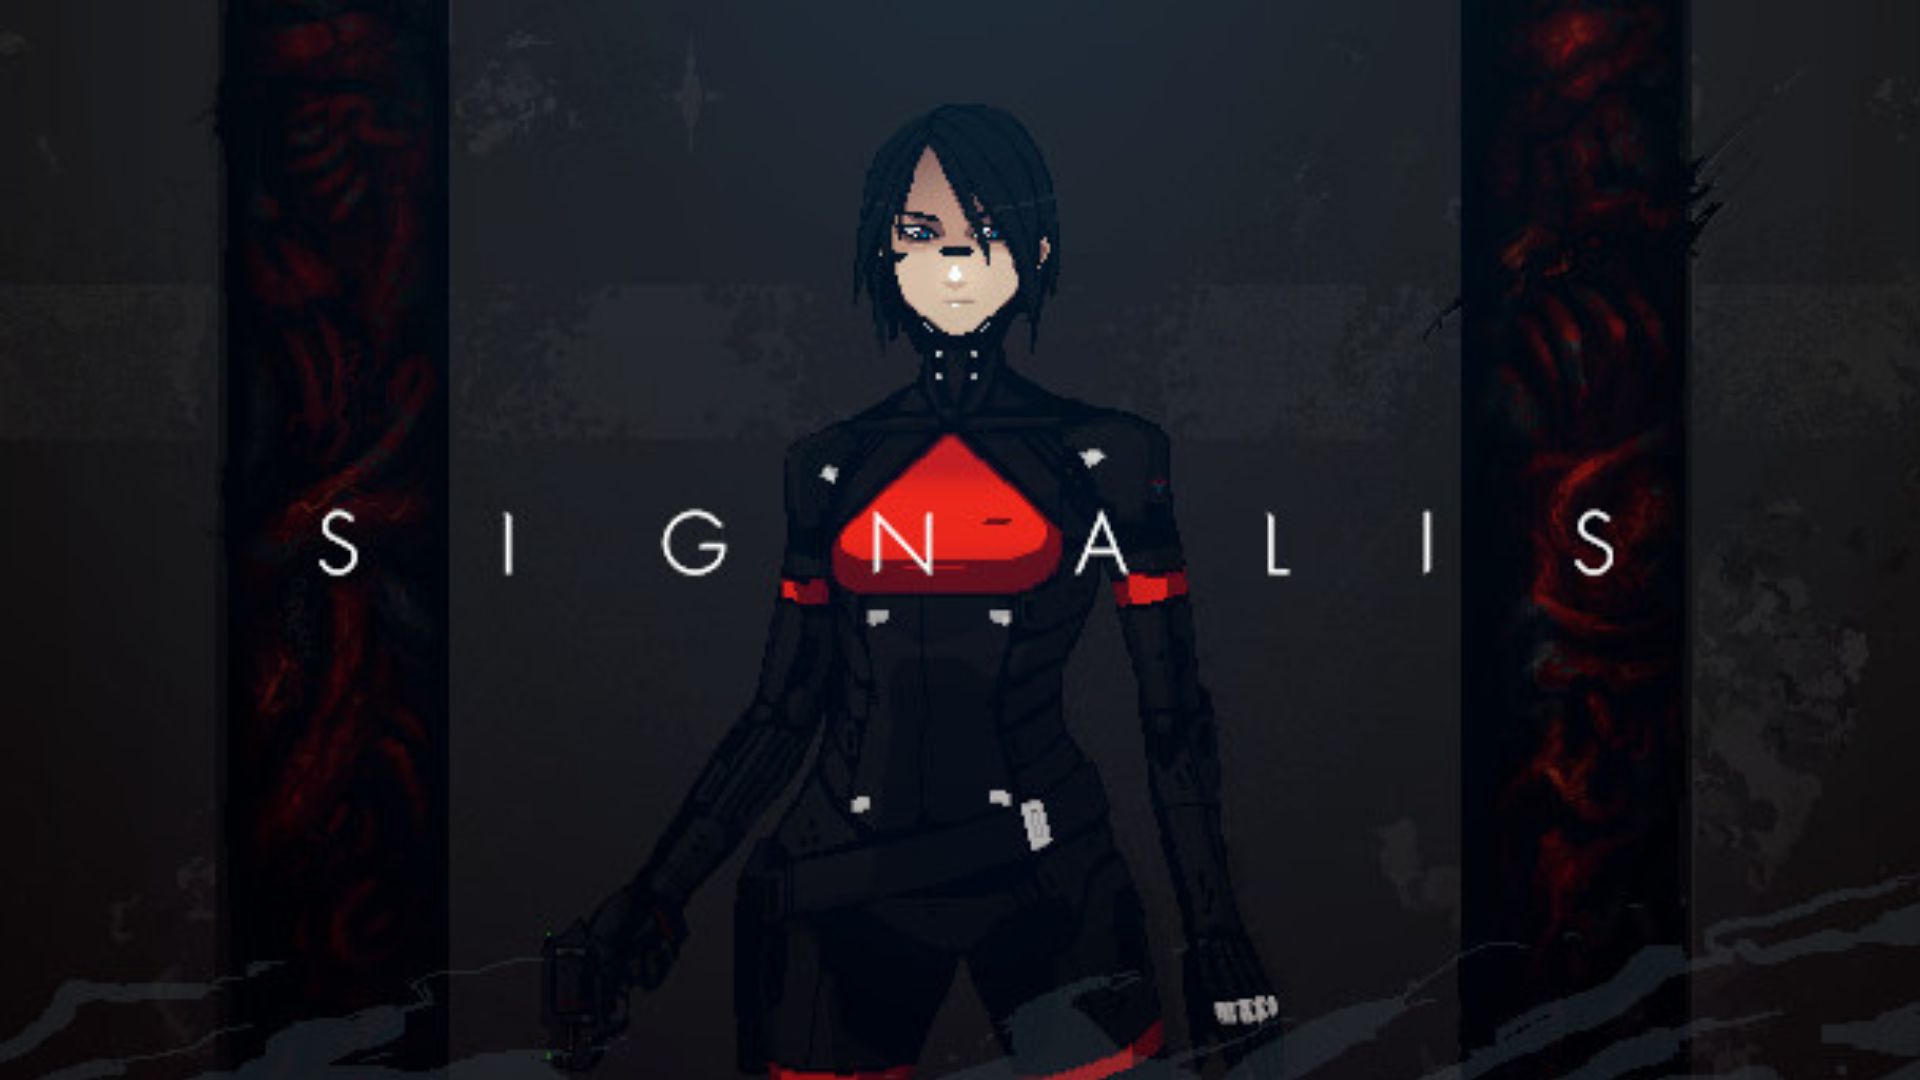 Signalis Physical Version Launches in February 2023